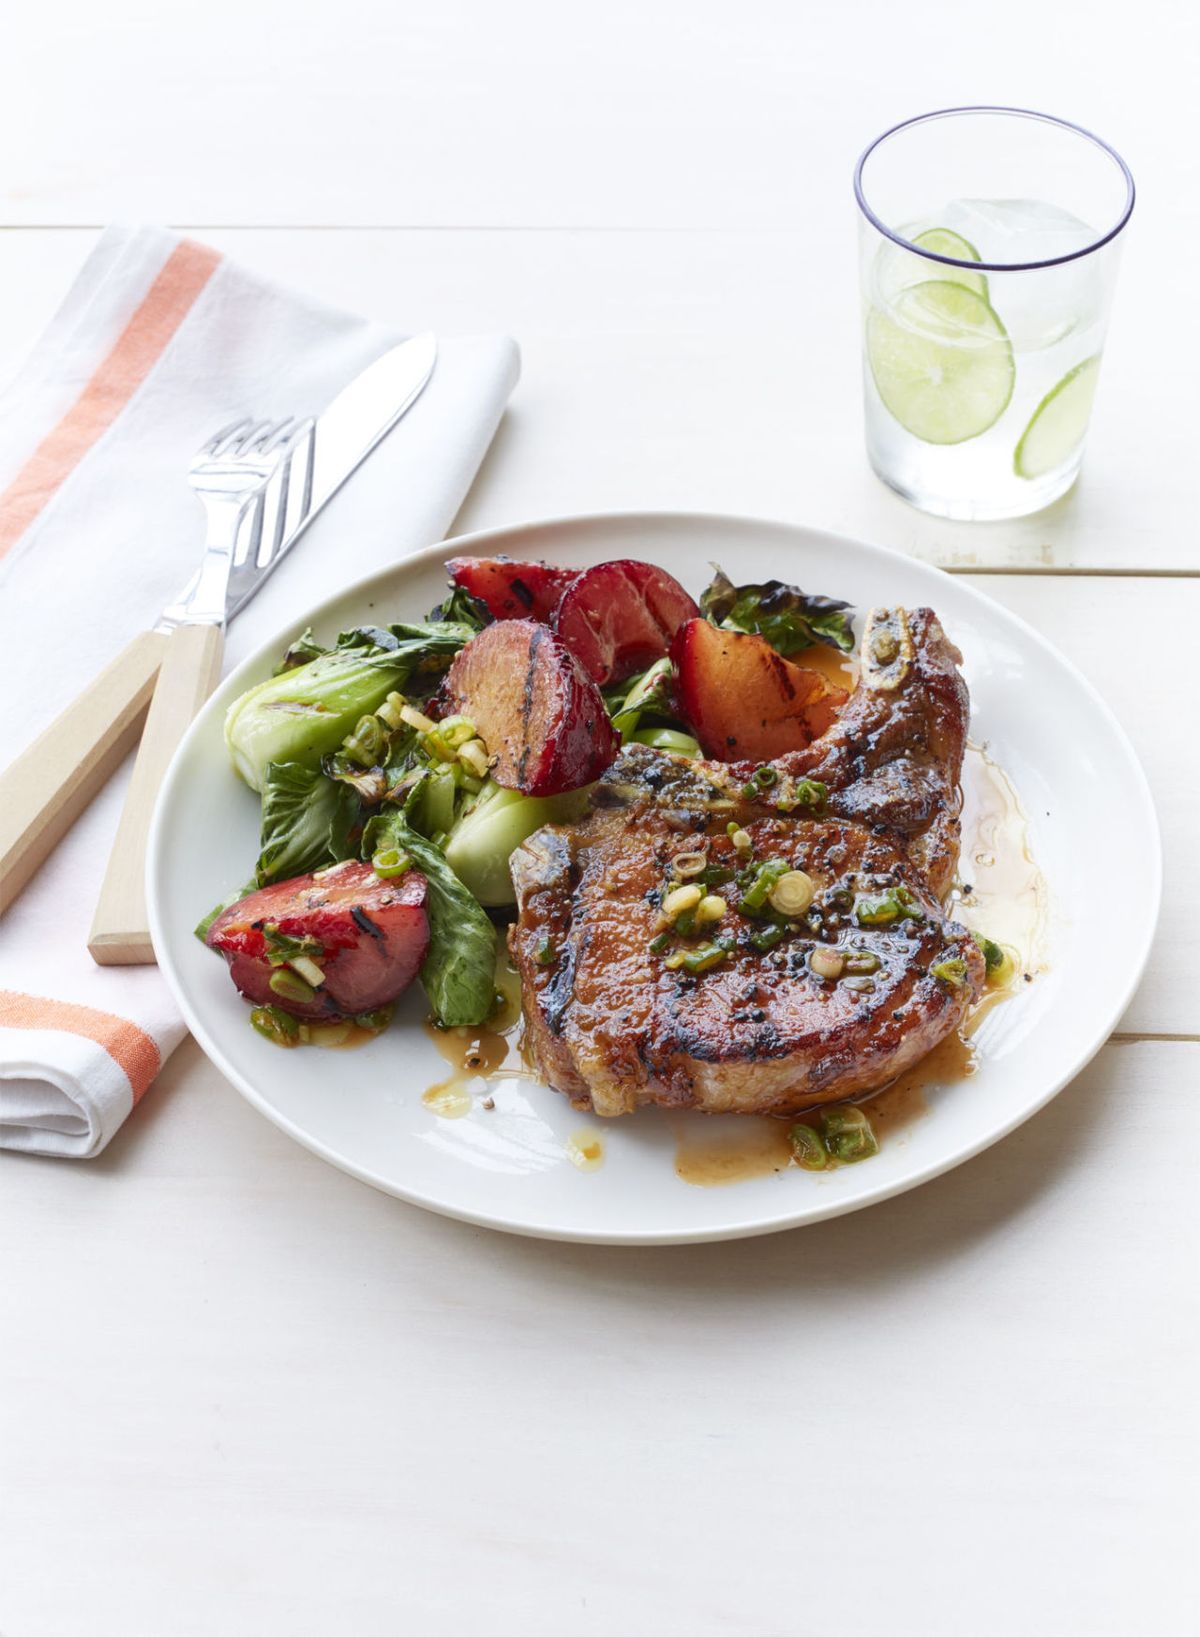 Heart Healthy Recipes - Grilled Pork Chops with Plum and Bok Choy